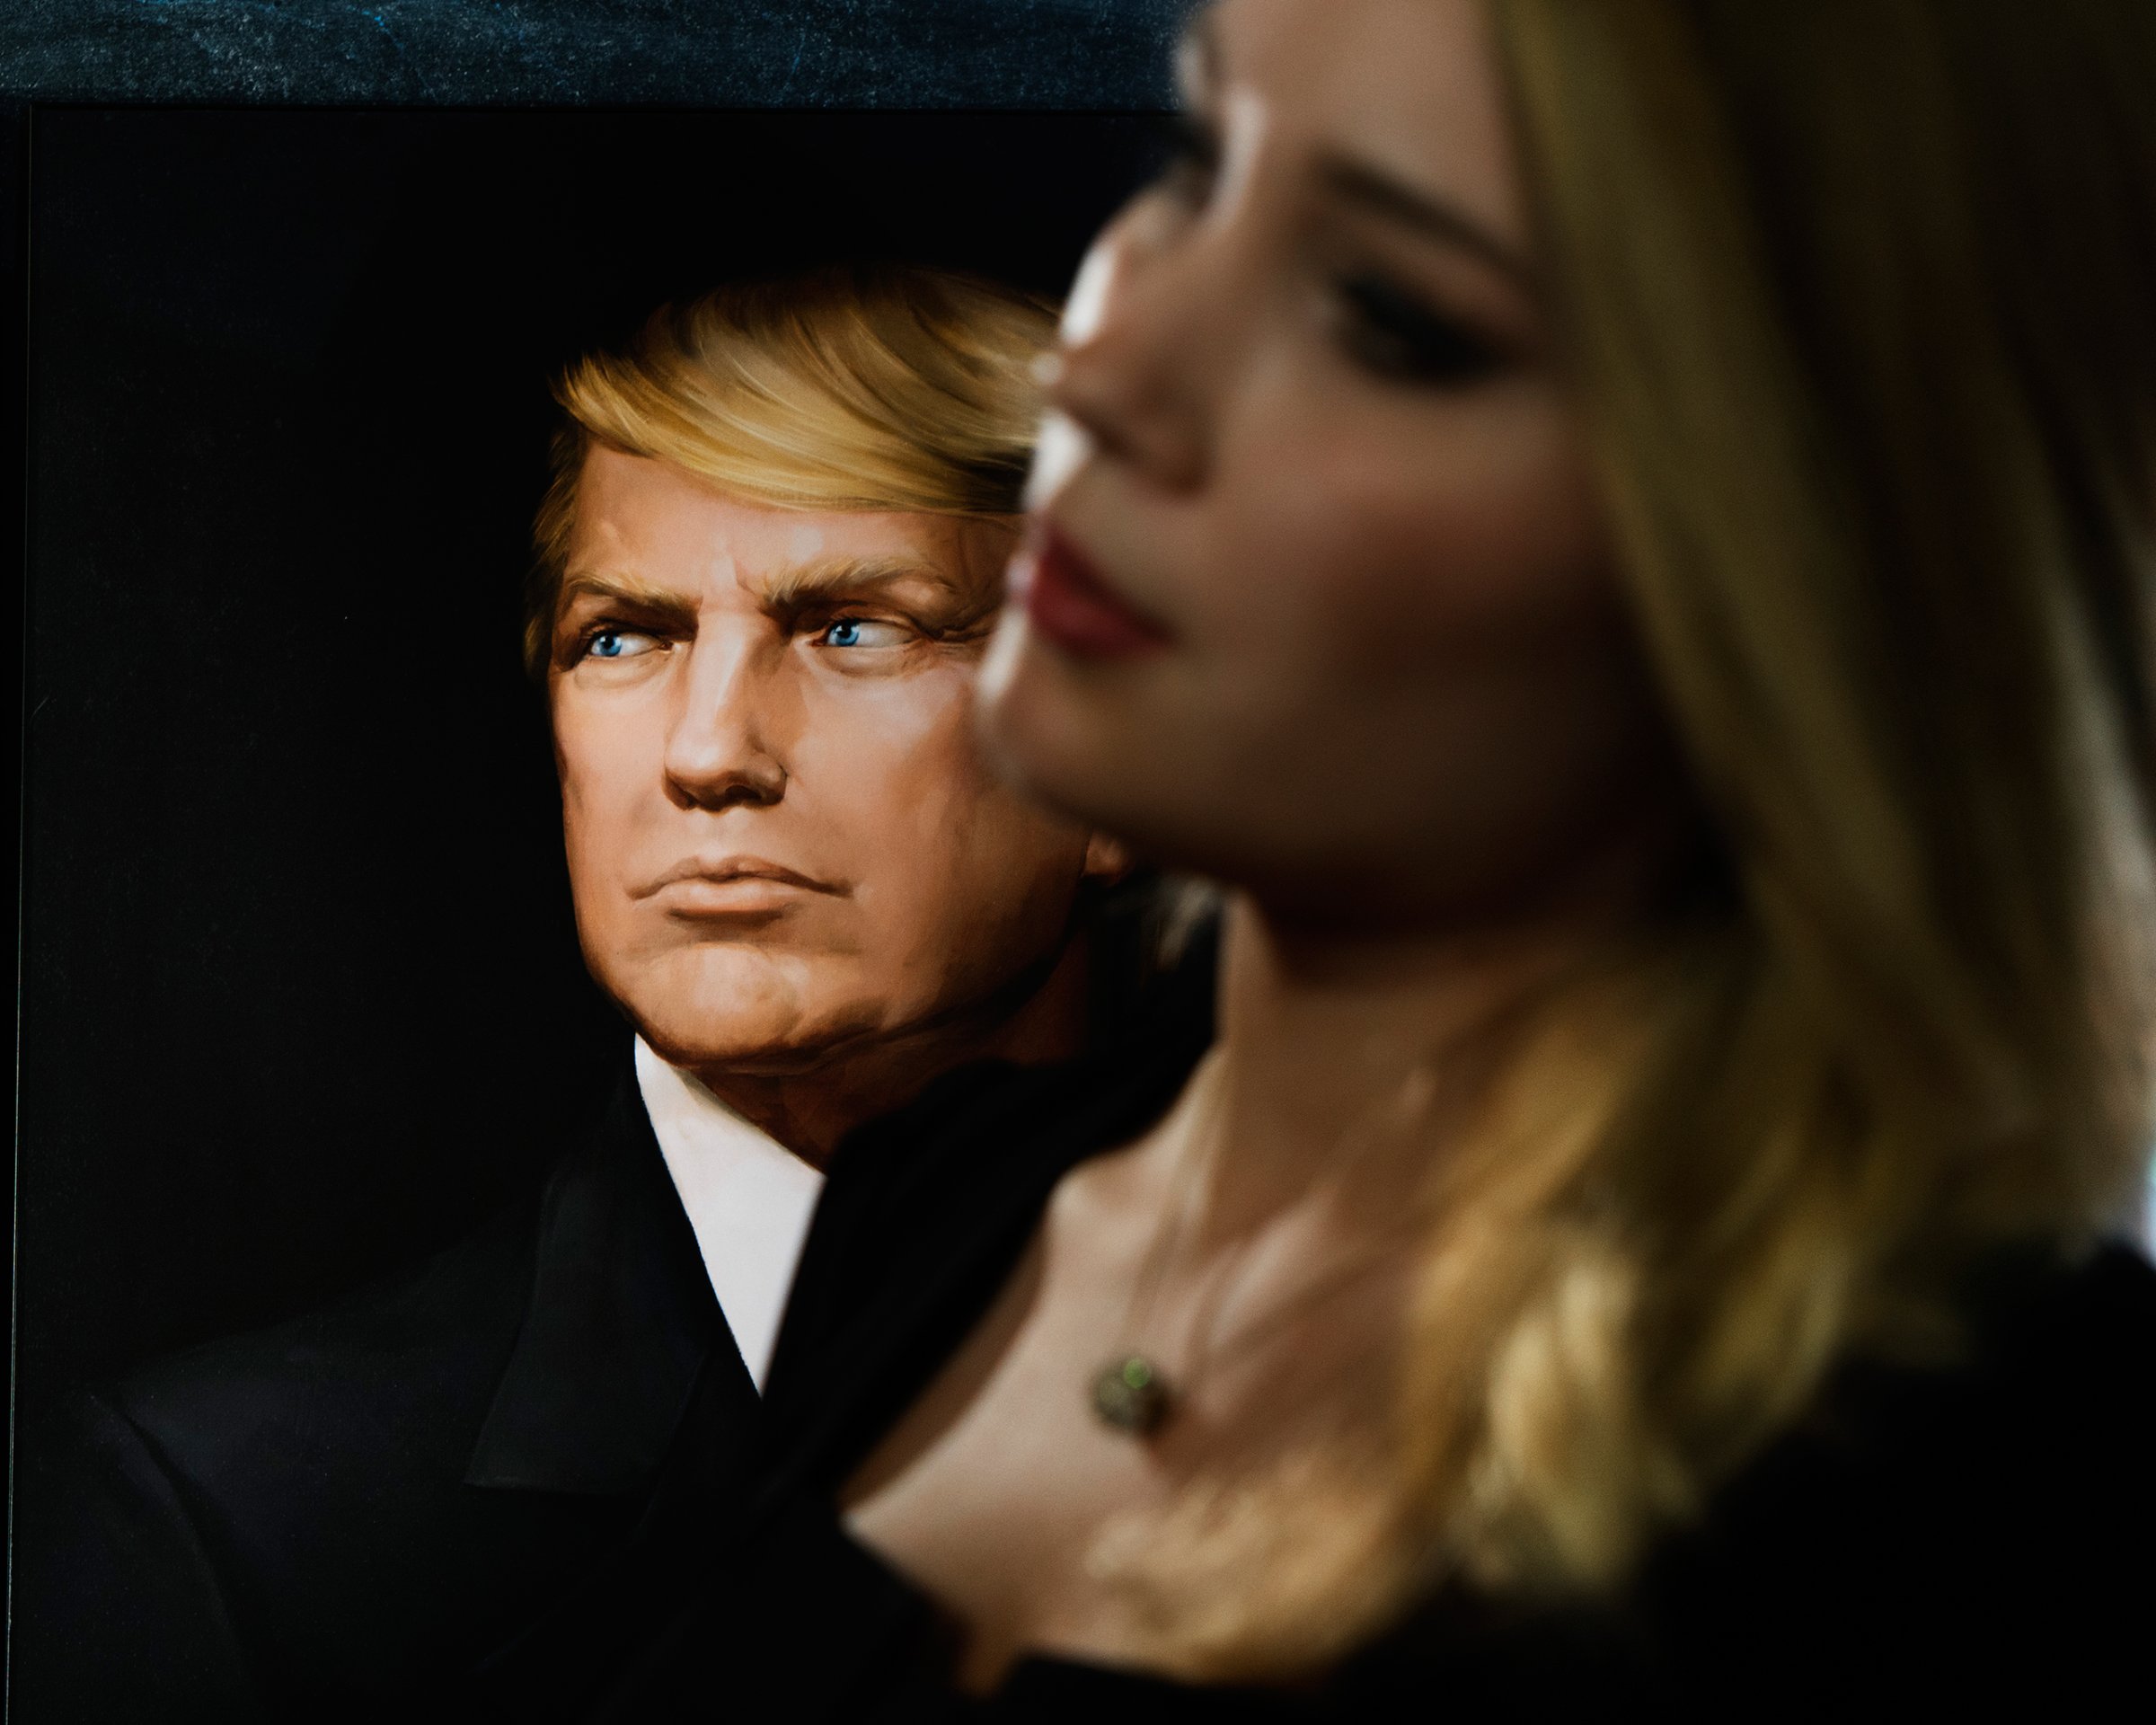 A portrait of U.S. President Donald Trump at an event organized by Maria Katasonova and TzarGrad TV on the occasion of Trump's inauguration in Moscow on Jan. 20, 2017. Katasonova, was a candidate MP in the last Duma election.